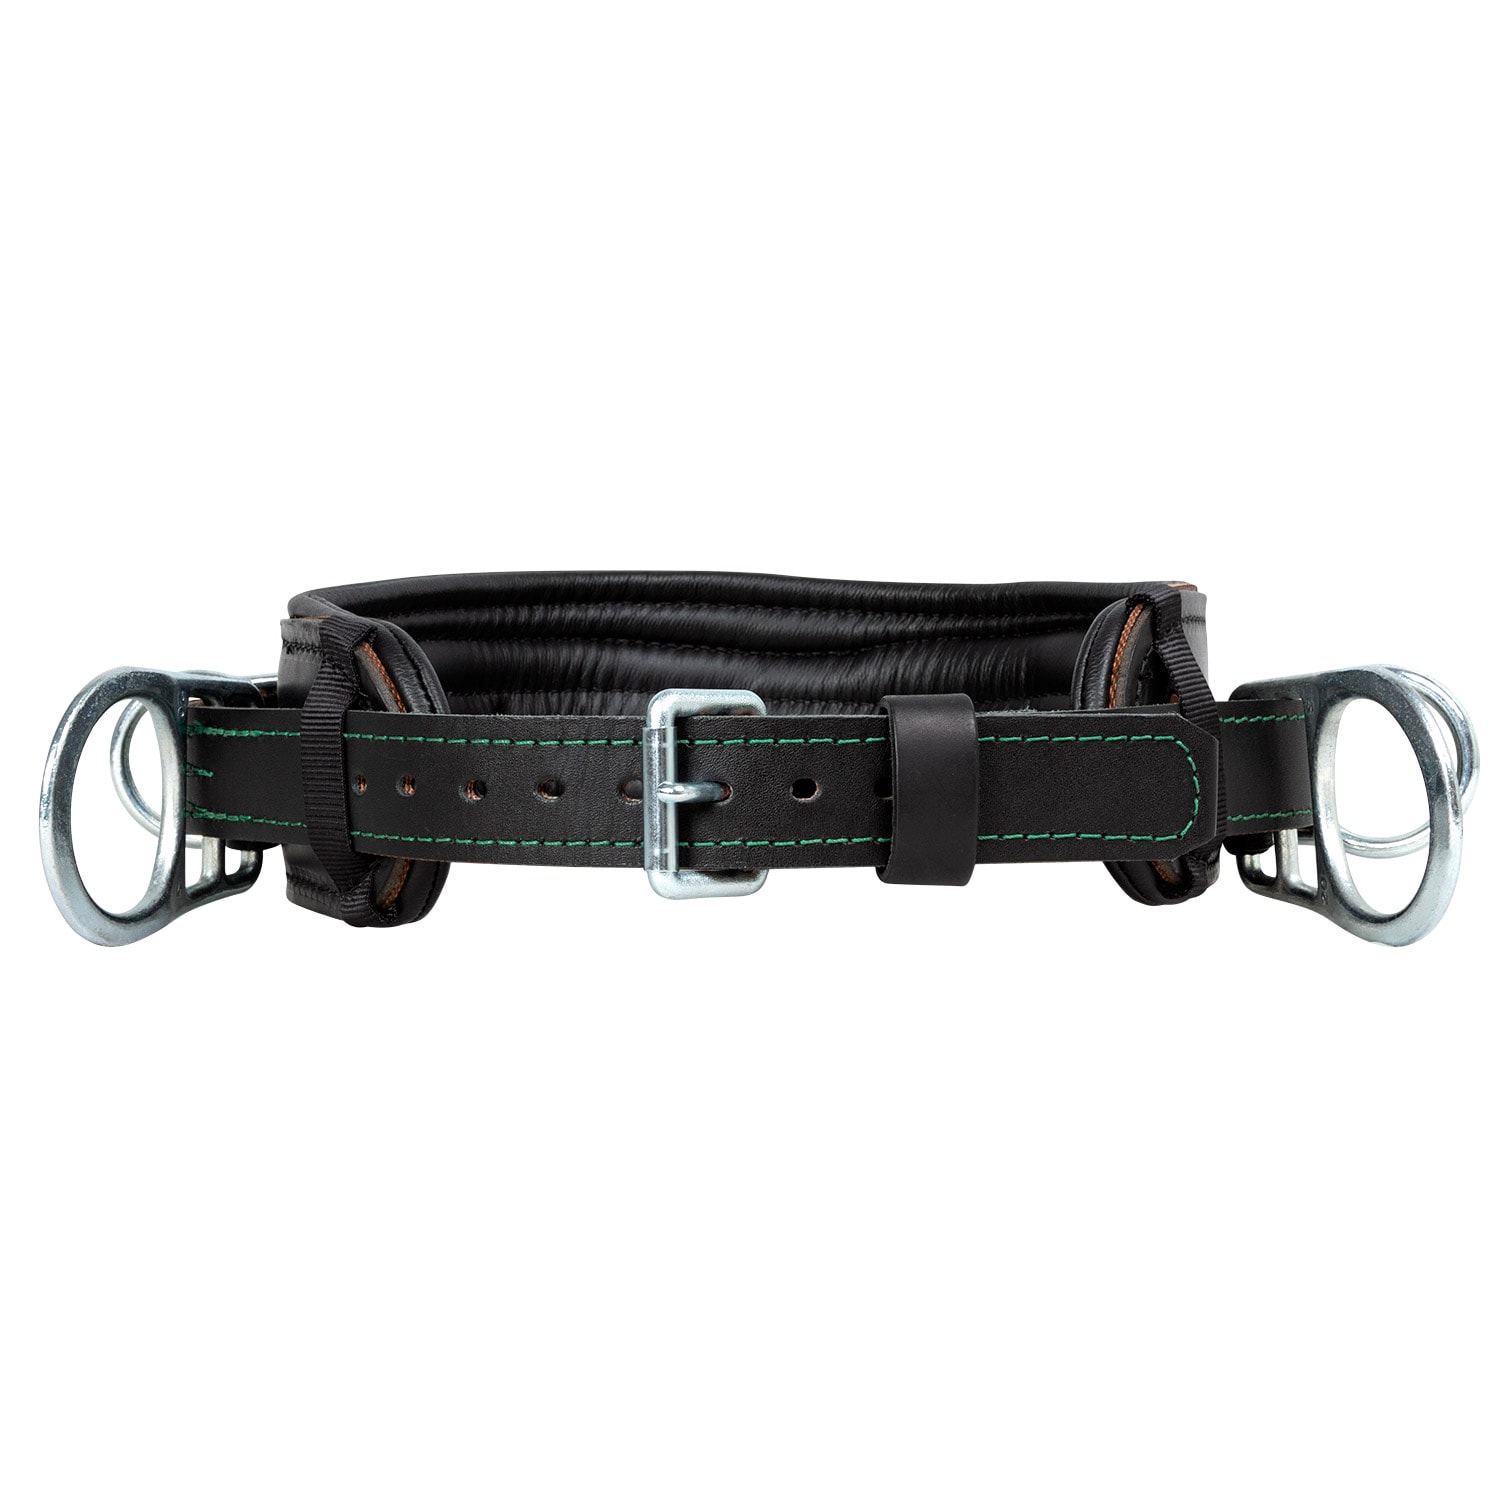 Buckingham Adjustable In-Line 4 D-Ring Leather Body BeltBuckingham Adjustable In-Line 4 D-Ring Leather Body Belt from GME Supply